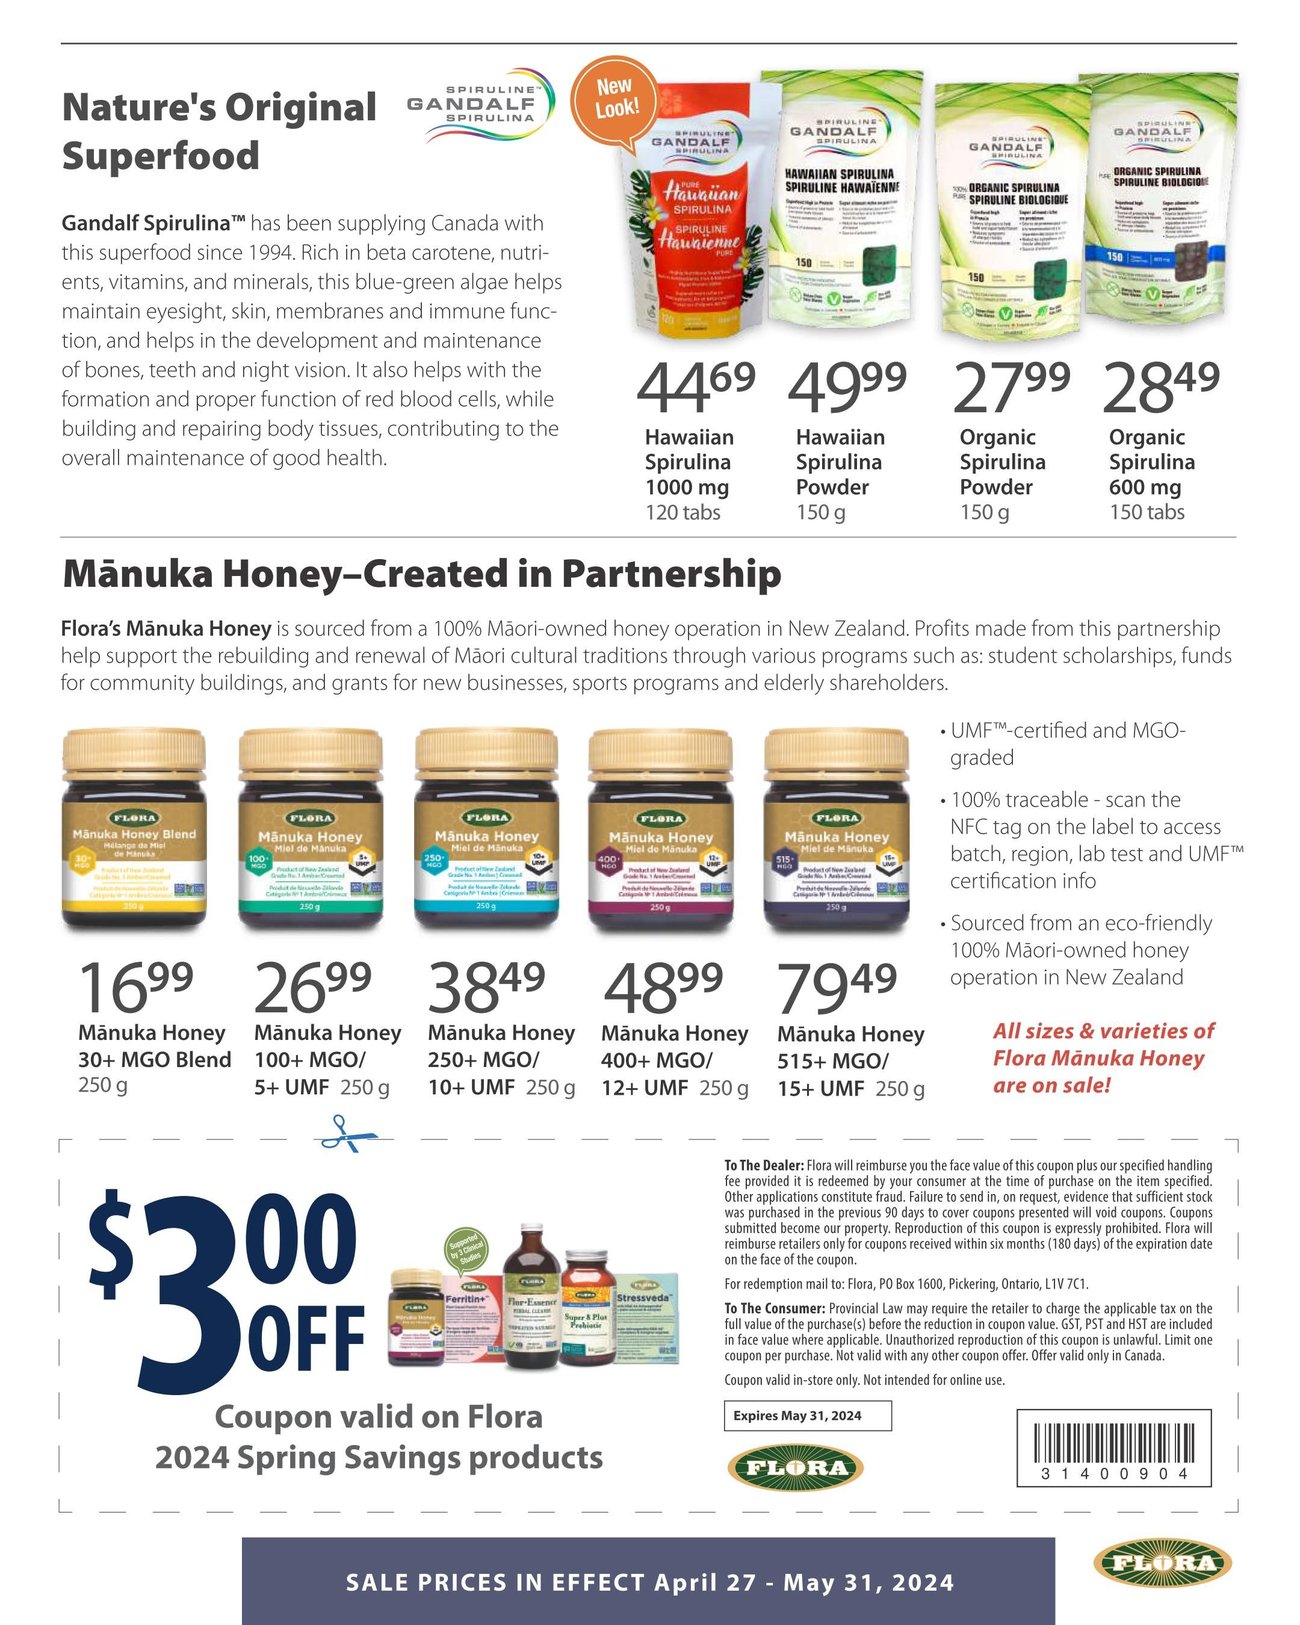 Lifestyle Markets - Monthly Savings - Page 7